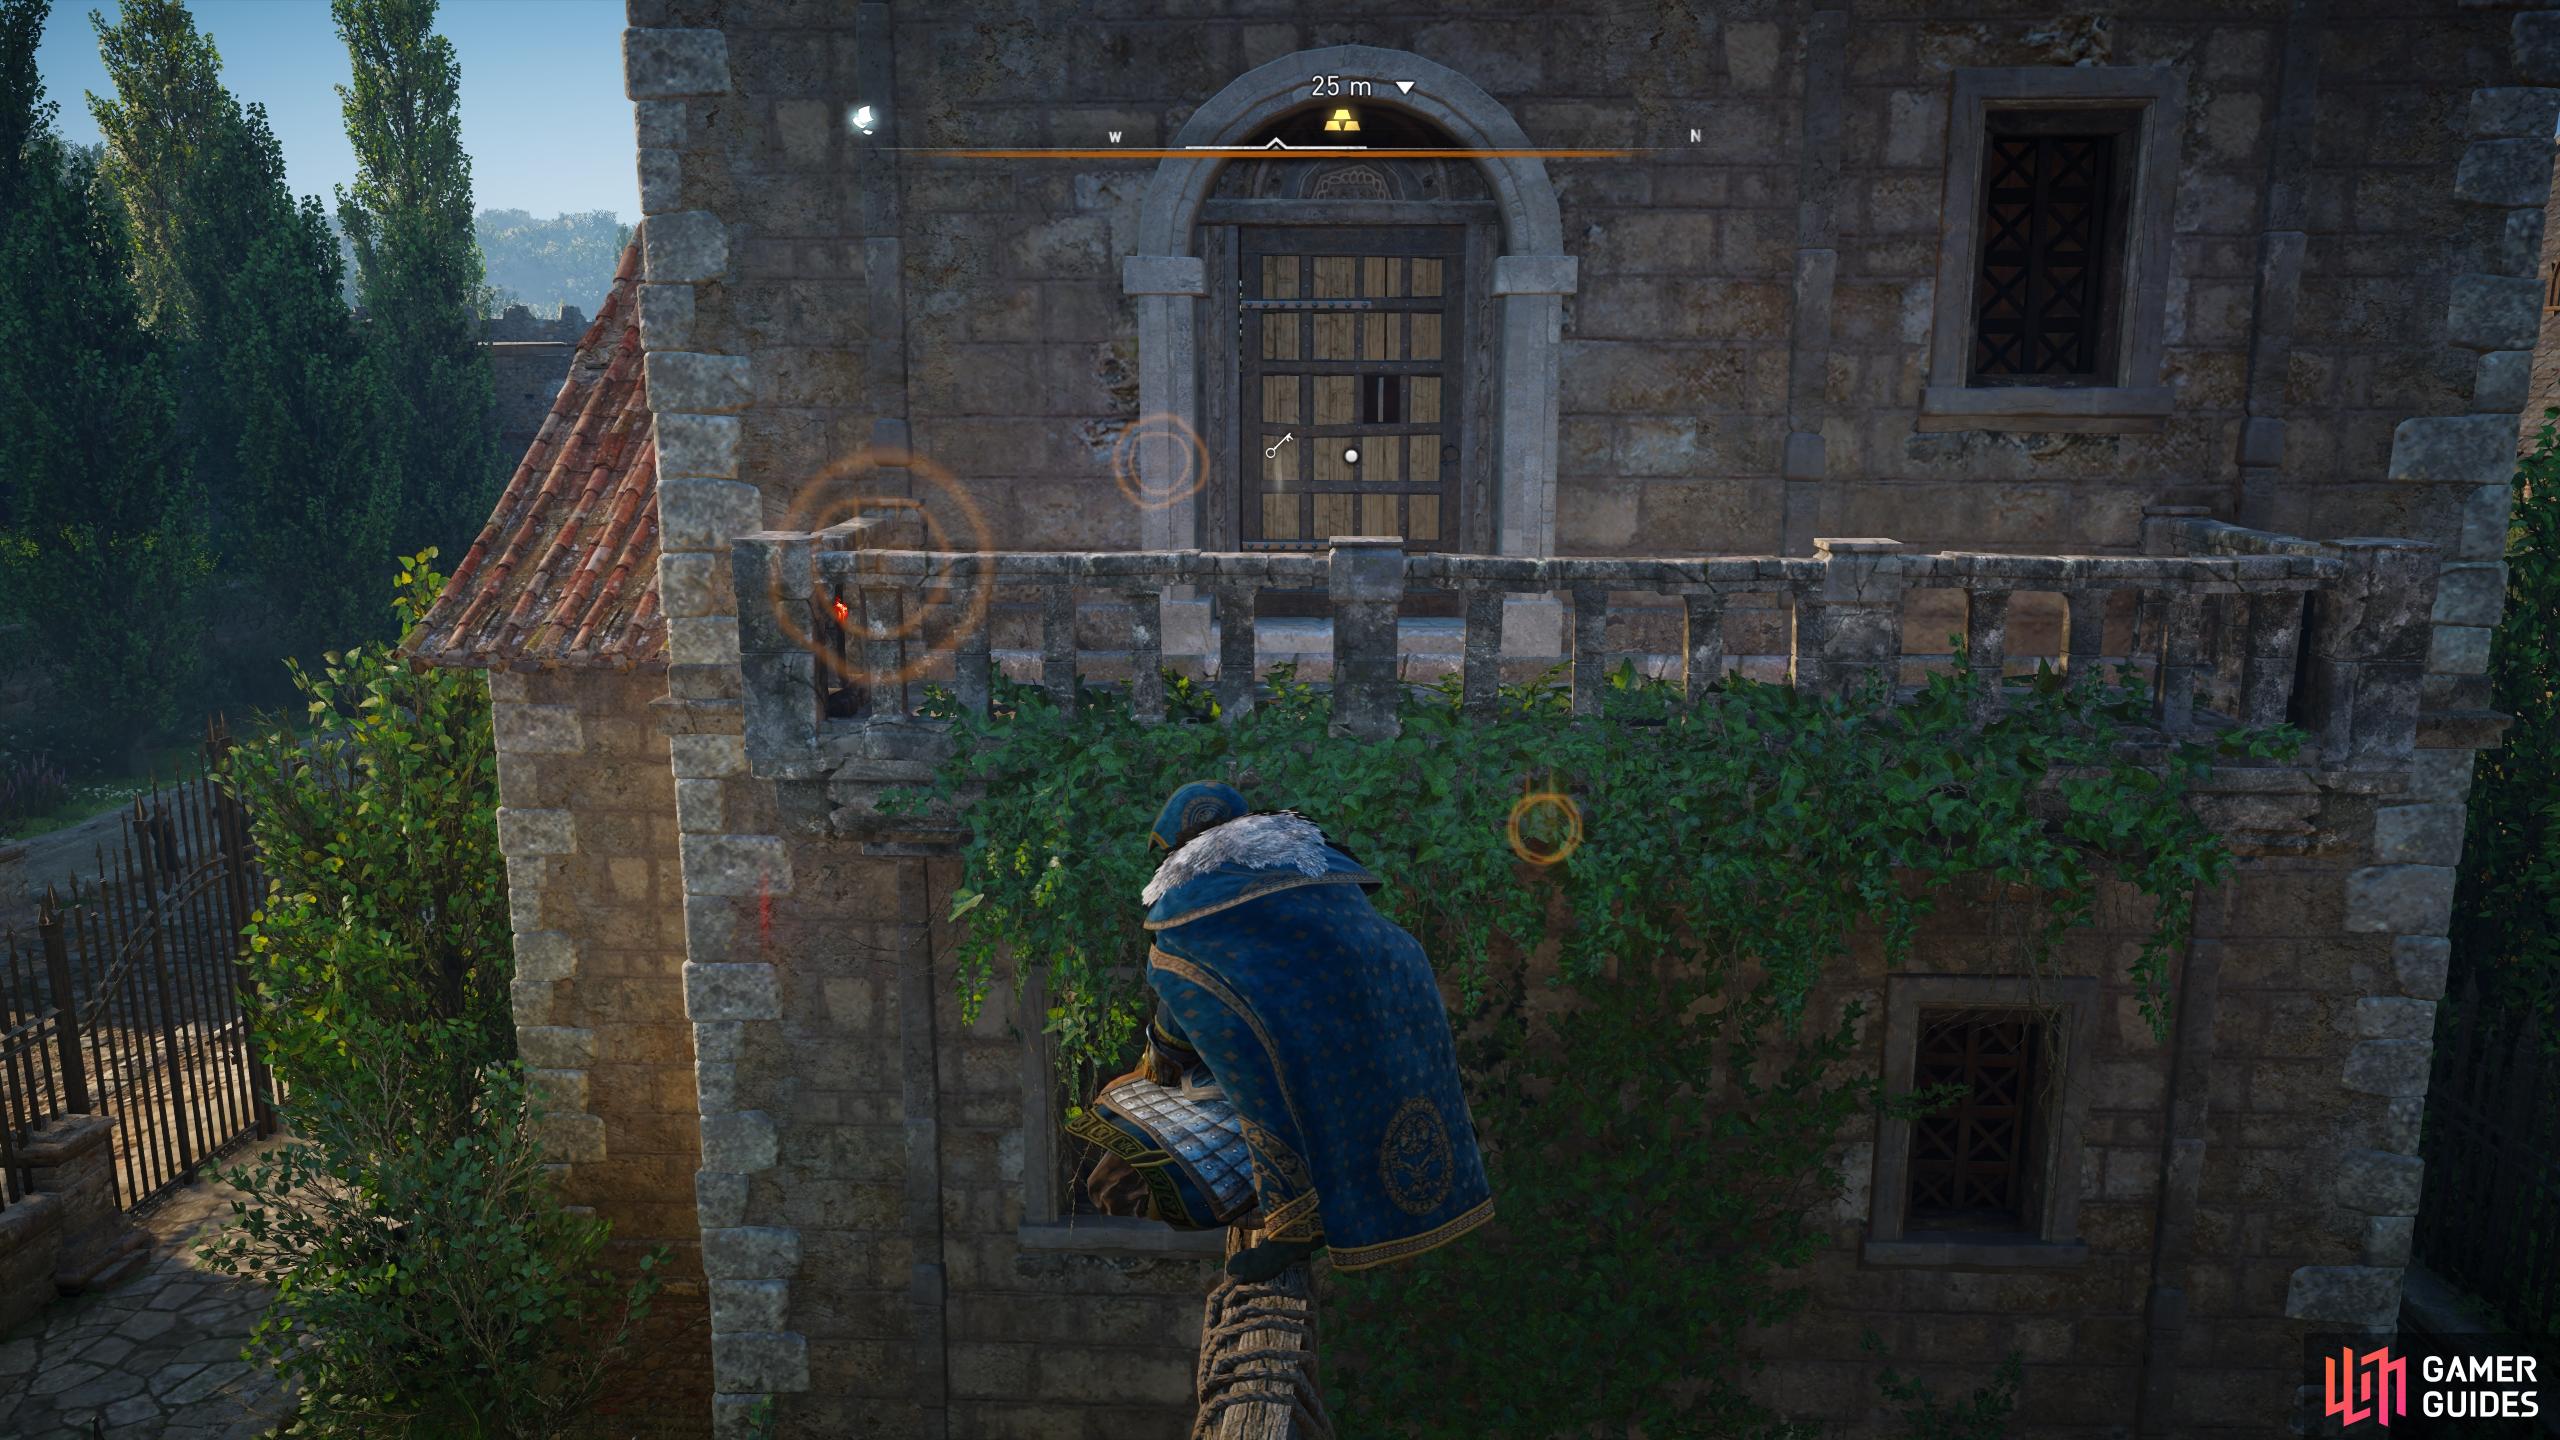 You can jump to the balcony from the building opposite, to the southeast.